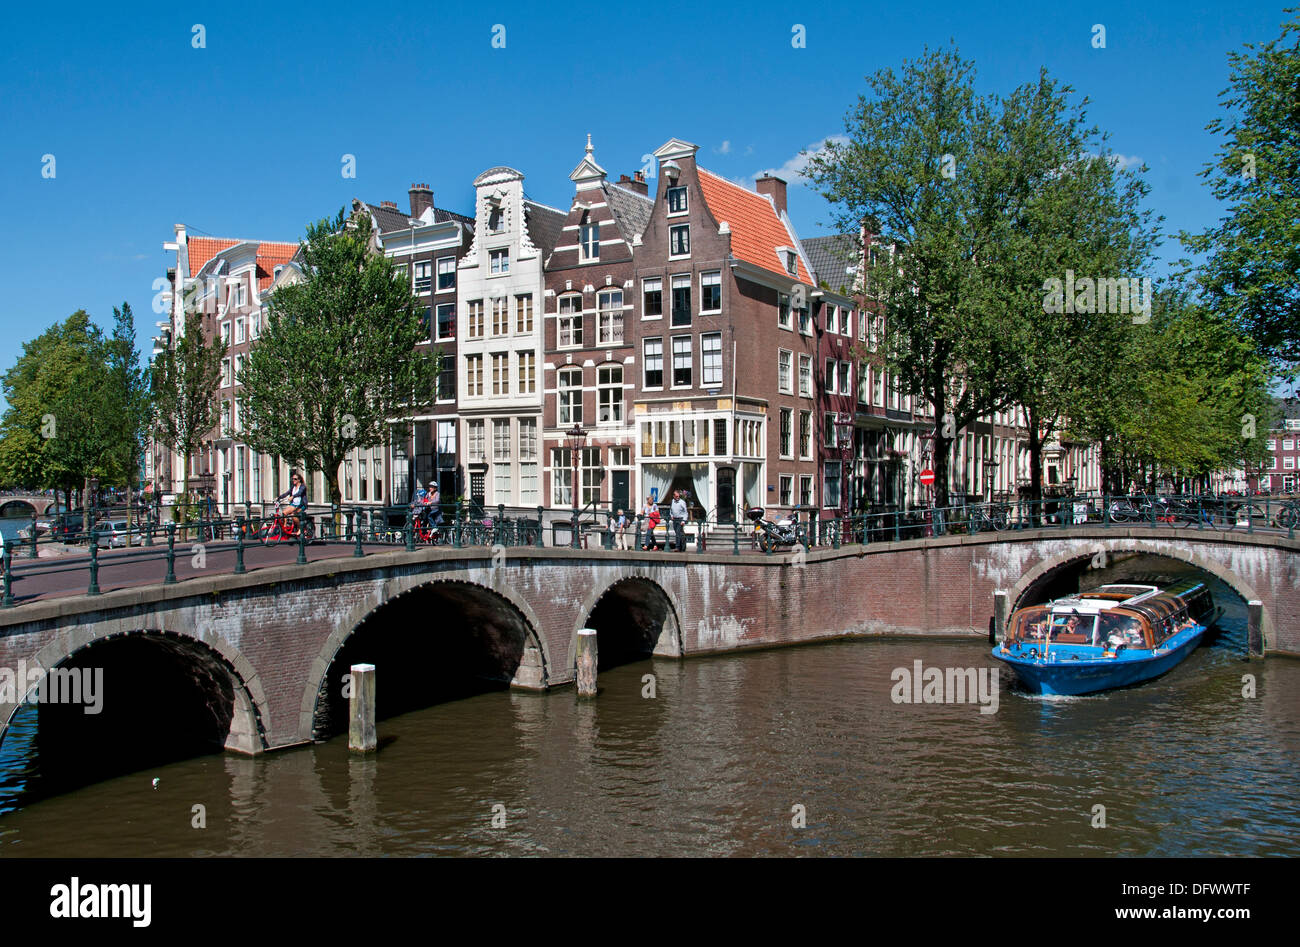 Keizersgracht Amsterdam Netherlands canal house city town boat Stock Photo